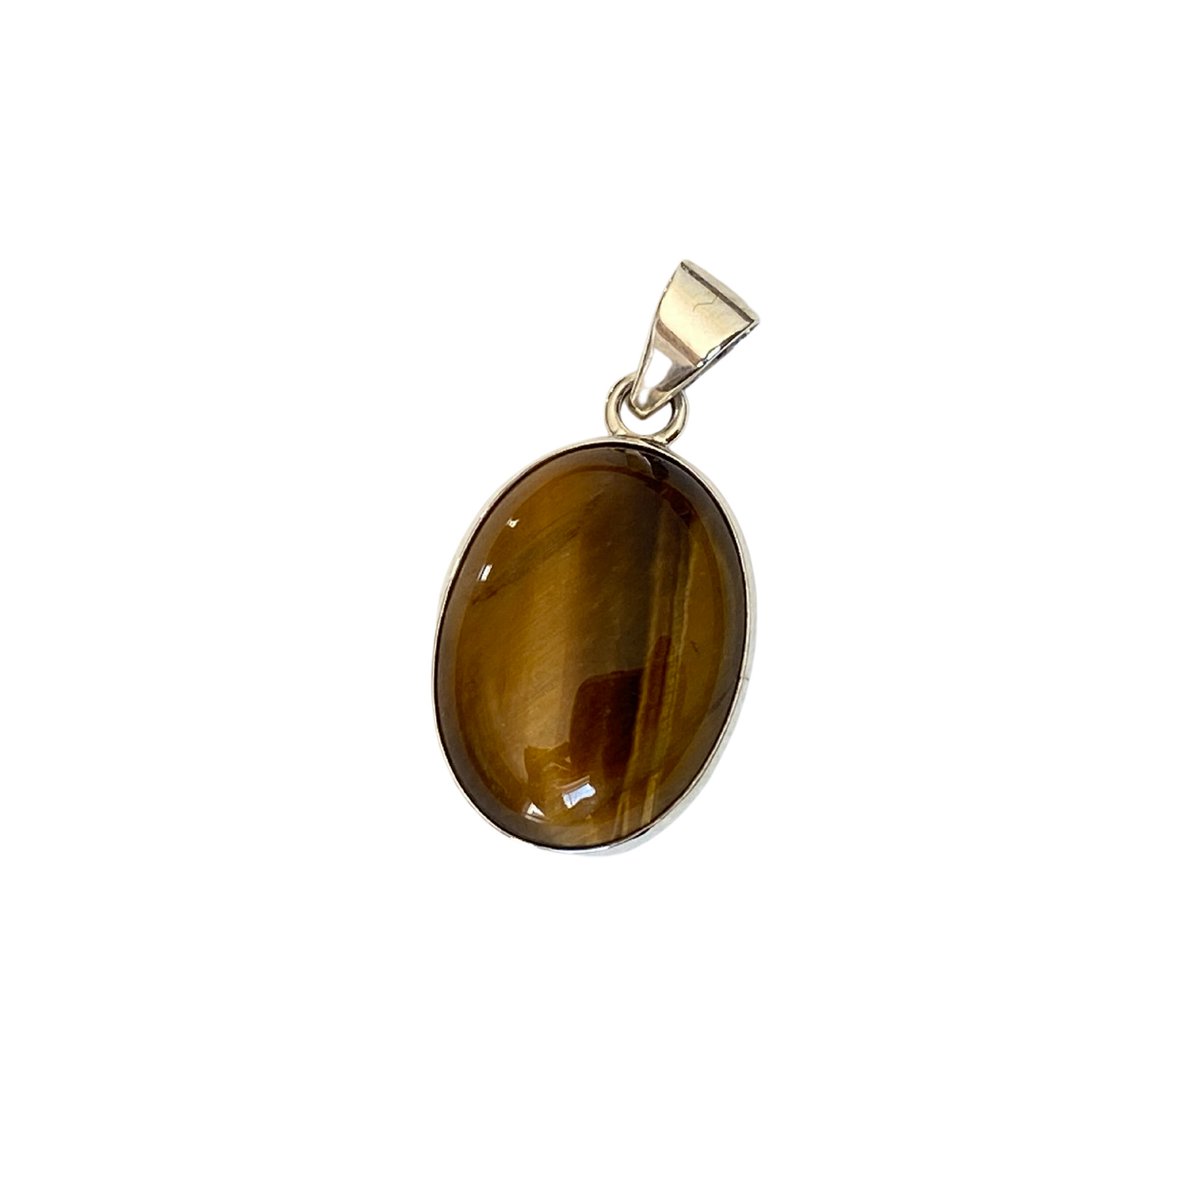 Natural Tiger Eye's Pendant Necklace
#love #crystals #beautiful #ootd #shopetsy #jewelry #etsyfavorites #etsyelite #etsymade #women #silver #pendant #shopping #gift #necklace #earrings #handmade #handcrafted
echmeck.com